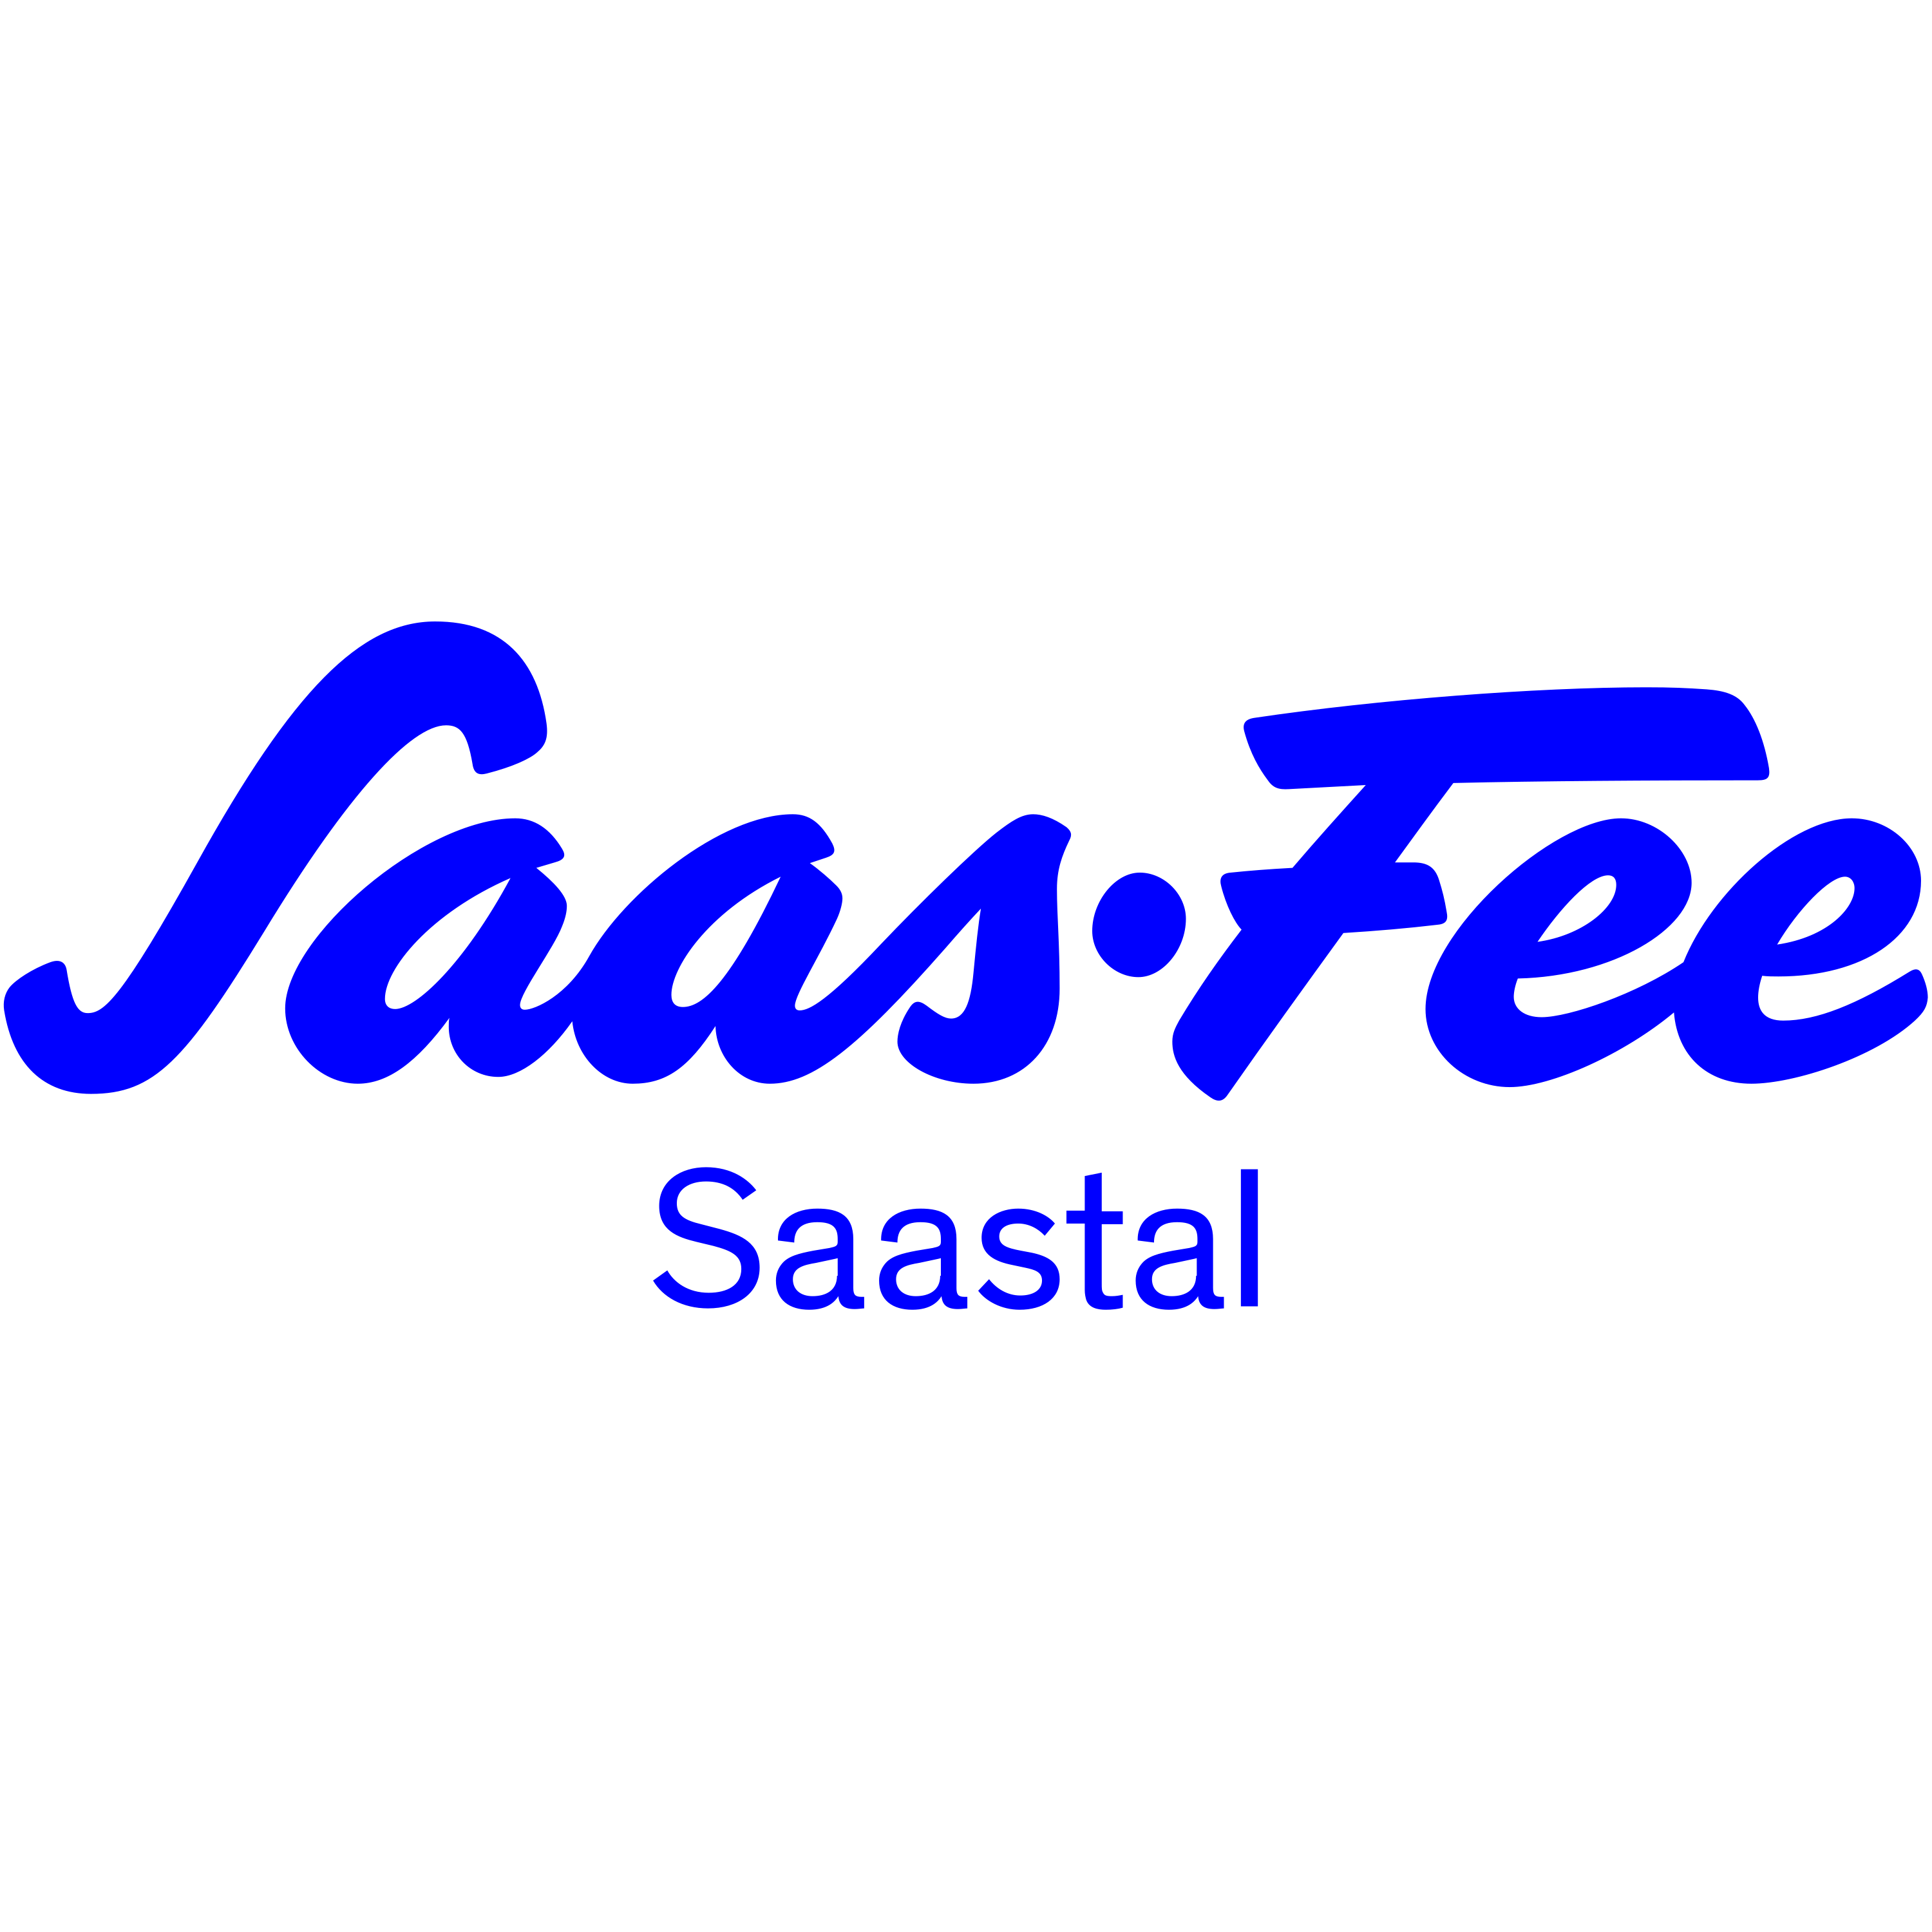 Che Saas Fee Logo Transparent Picture